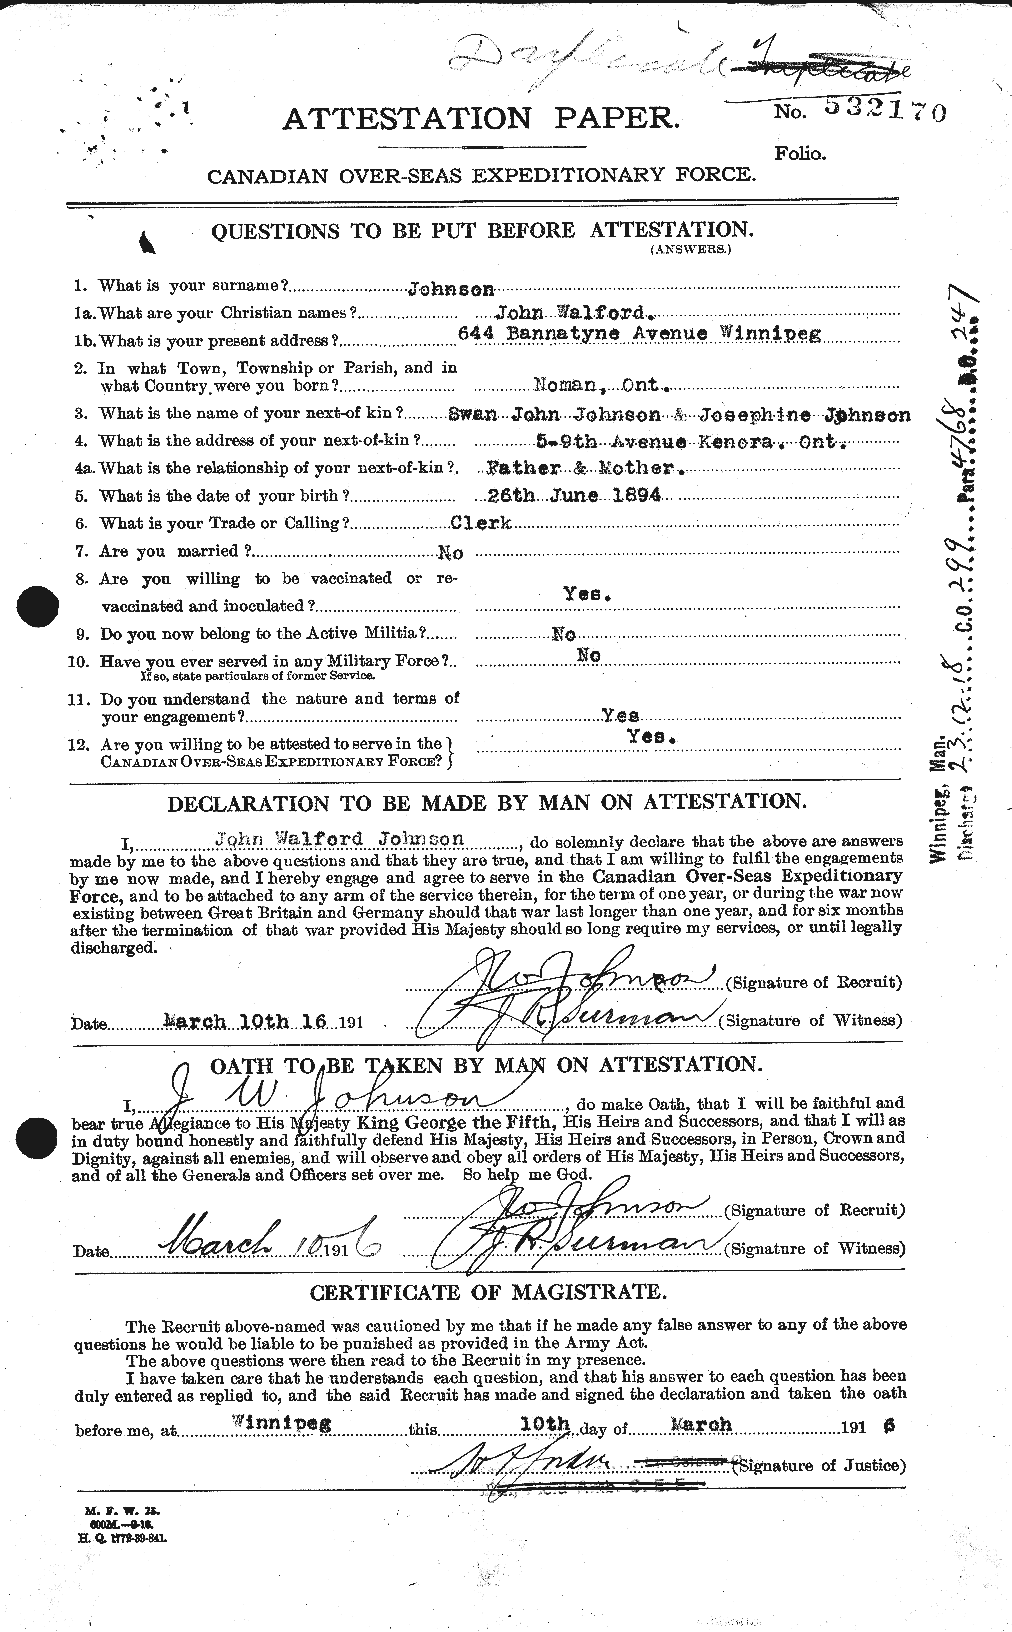 Personnel Records of the First World War - CEF 421976a